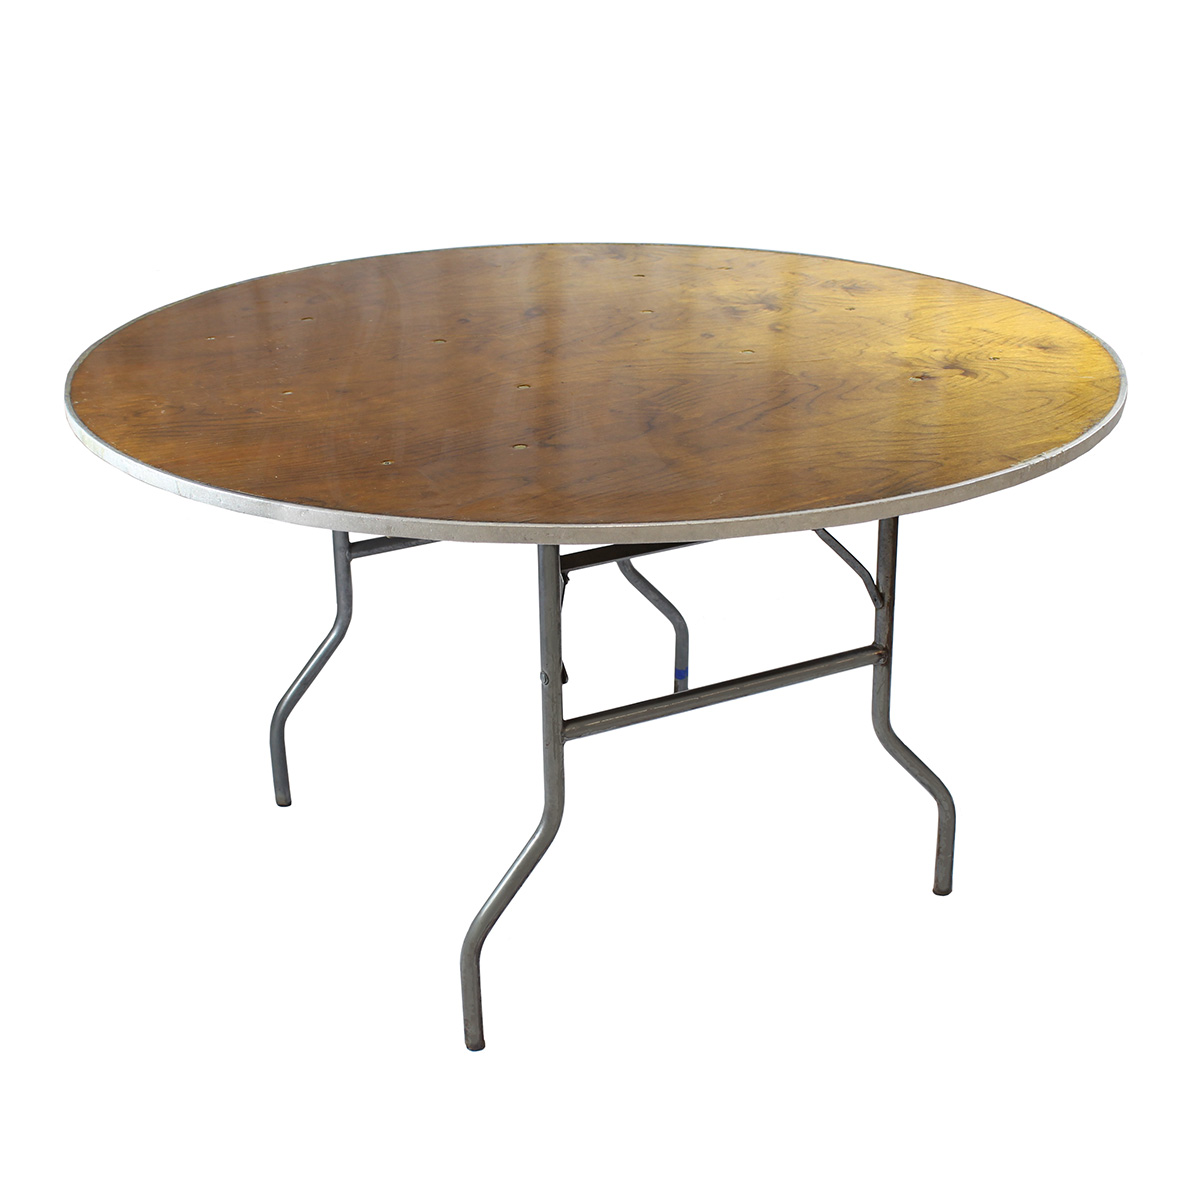 Table 60" Round Wood Topped (most common size)